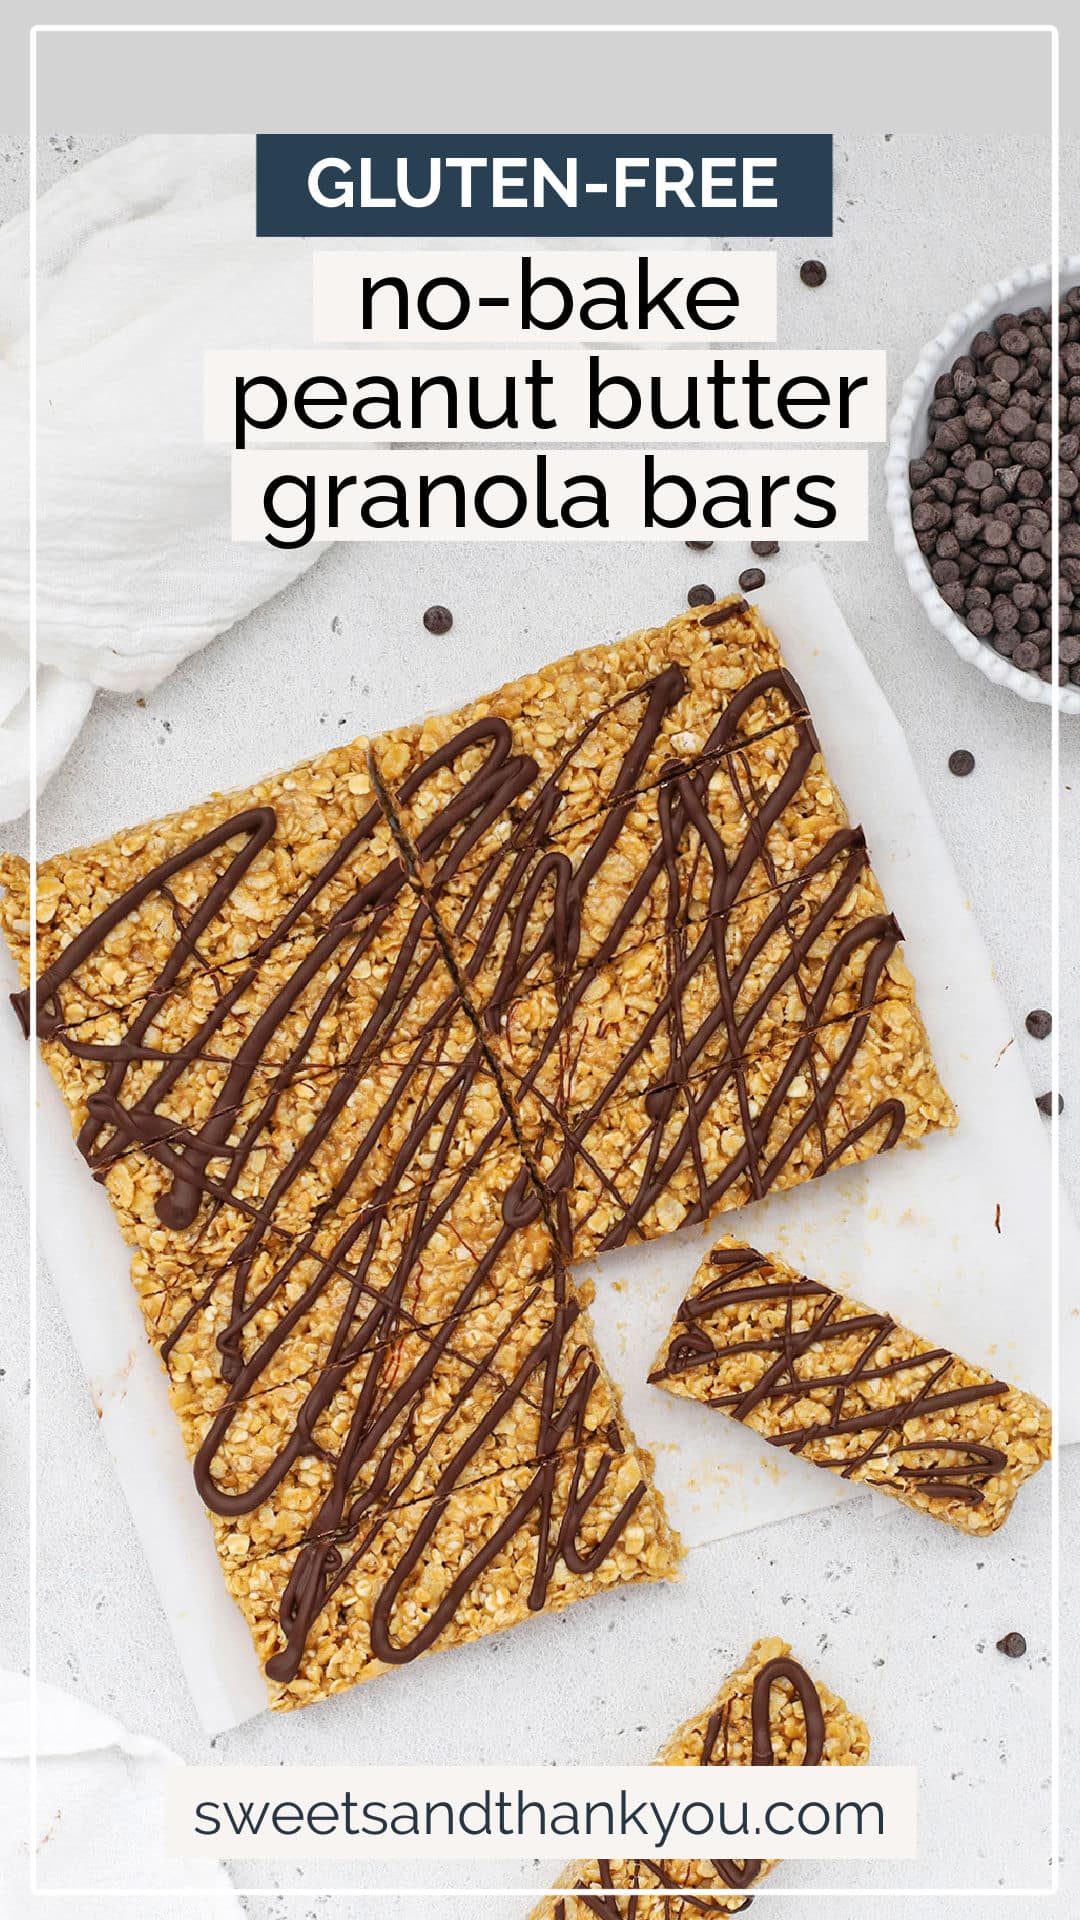 No-Bake Peanut Butter Granola Bars - These healthy homemade peanut butter granola bars are so easy and delicious! You only need a few ingredients & a few minutes to make them! (Gluten-Free, Vegan-Friendly) // soft peanut butter granola bars // healthy peanut butter granola bars // healthy granola bars // gluten-free granola bars // homemade granola bars recipe // soft granola bars // gluten-free snack // healthy snack // chocolate peanut butter granola bars // sweets and thank you granola bars